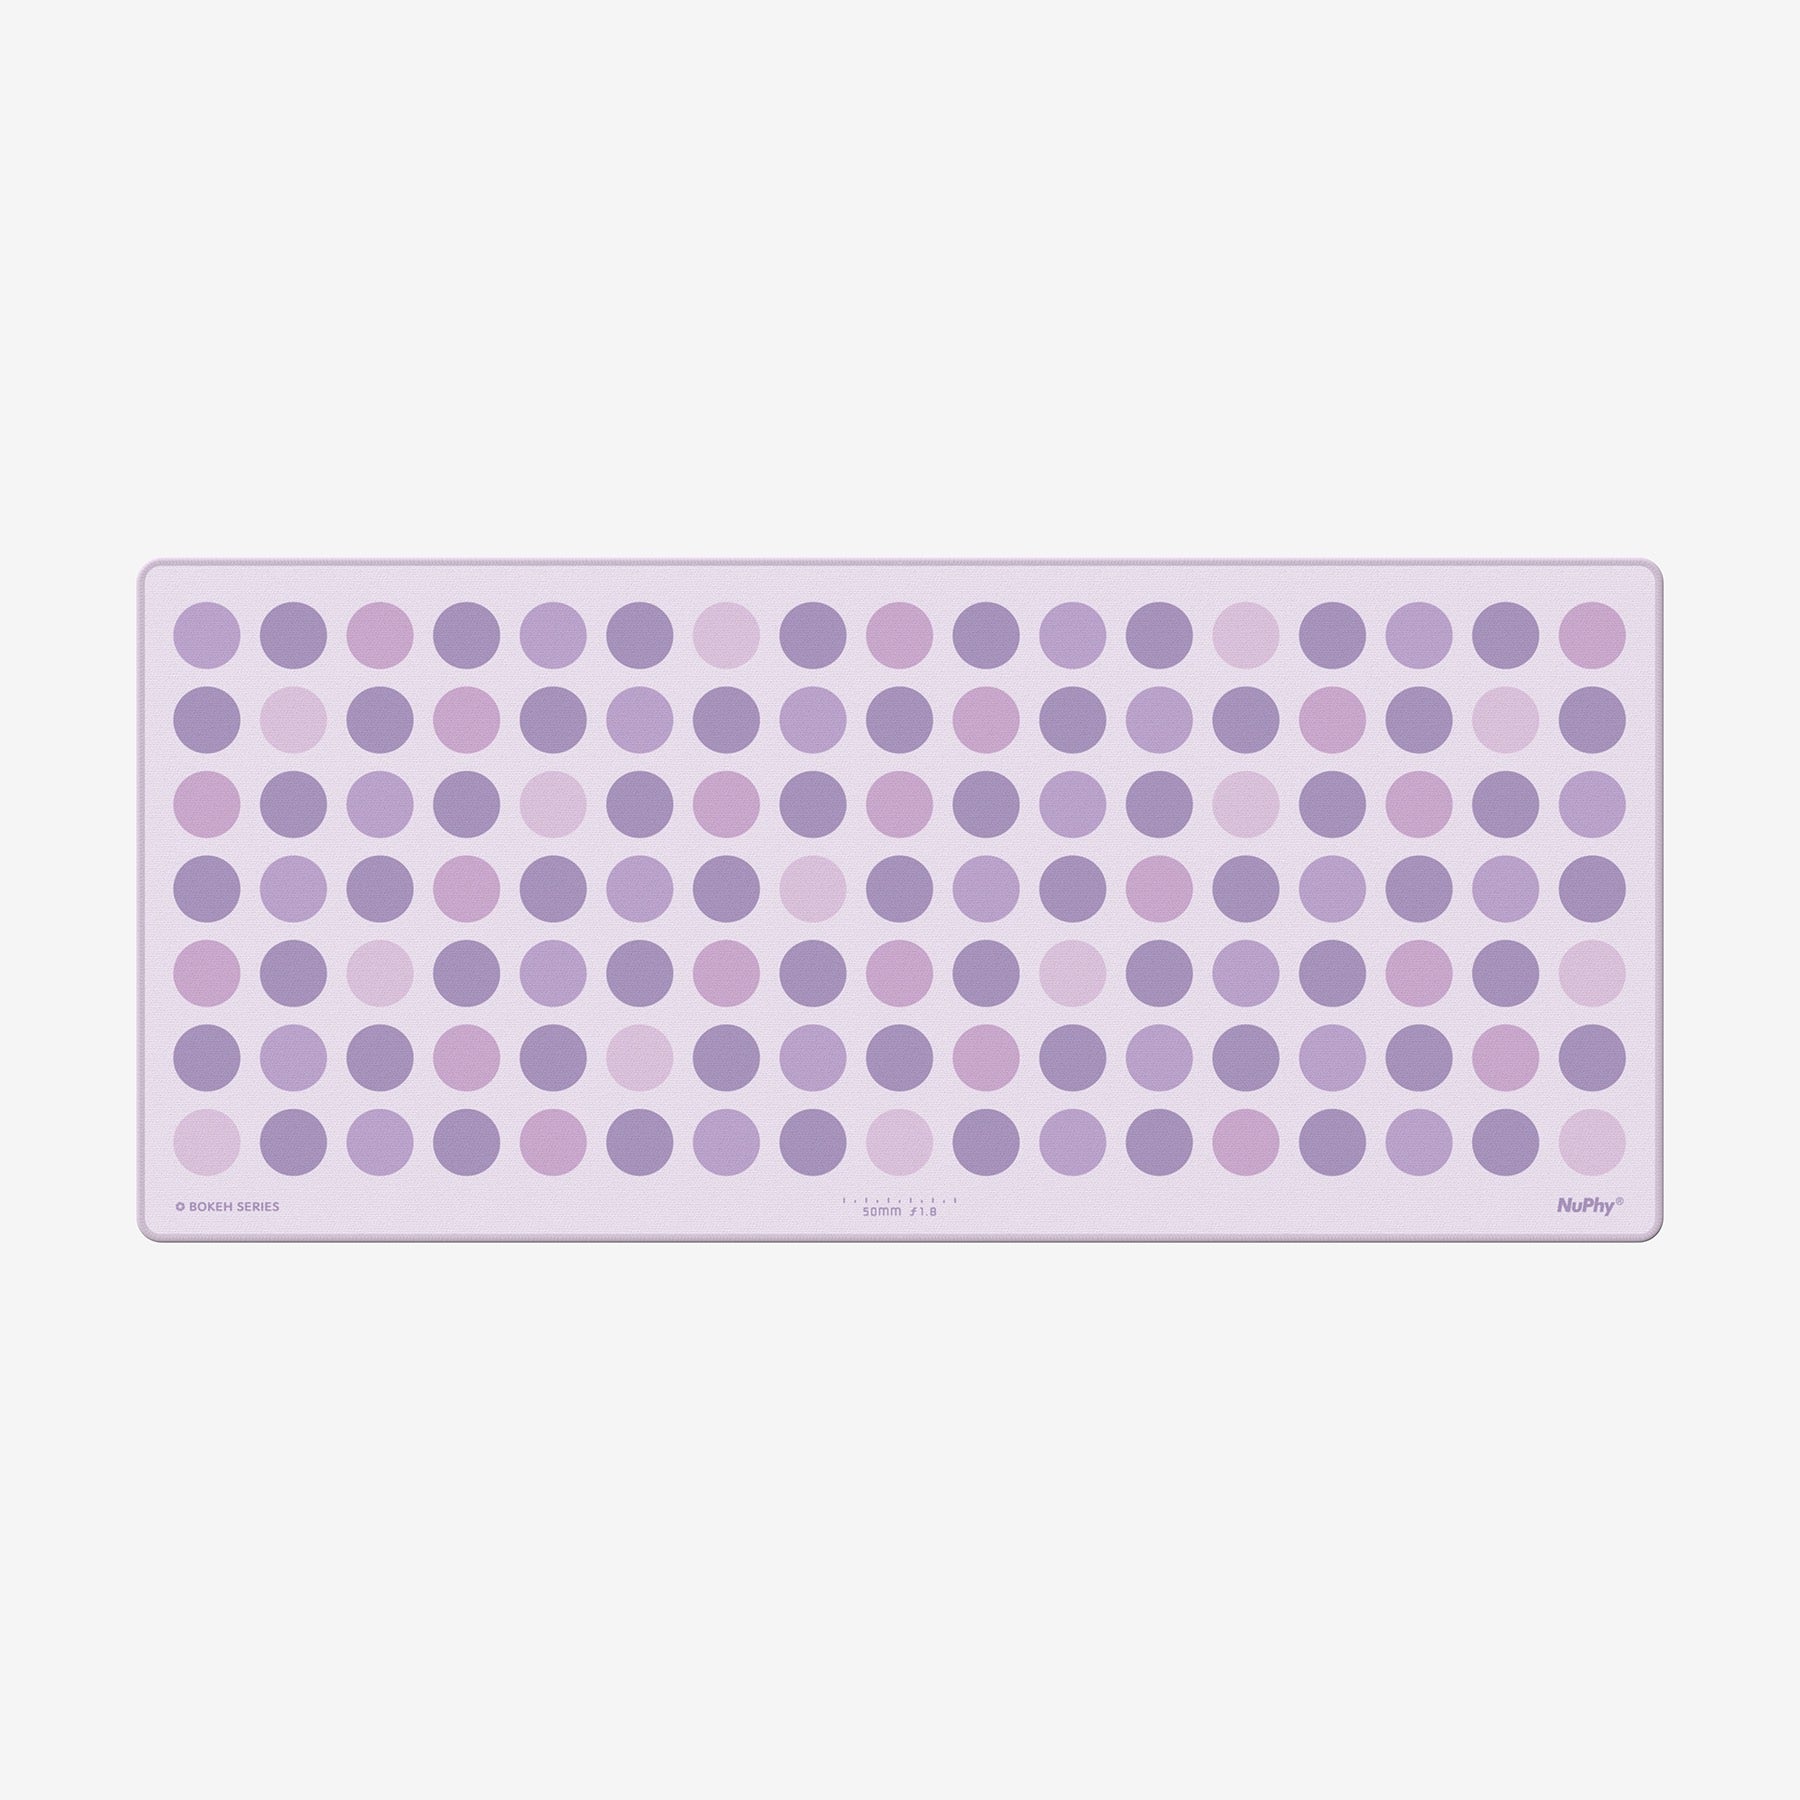 NuPhy Airy Lilac Deskmat (+12)